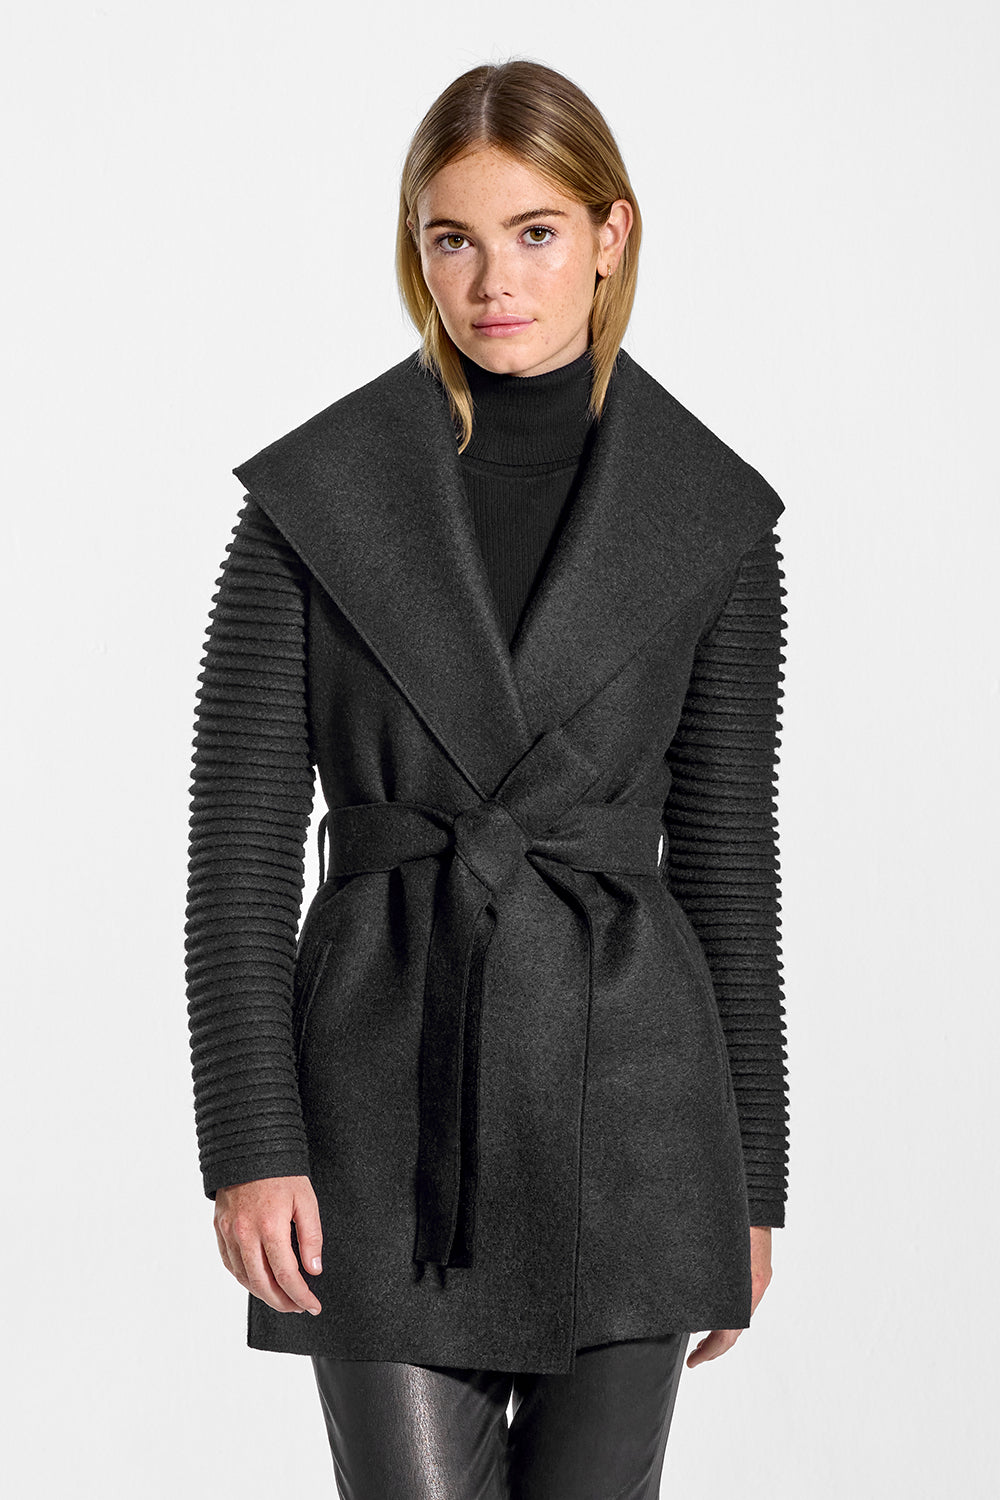 Wrap Black Coat with Ribbed Sleeves